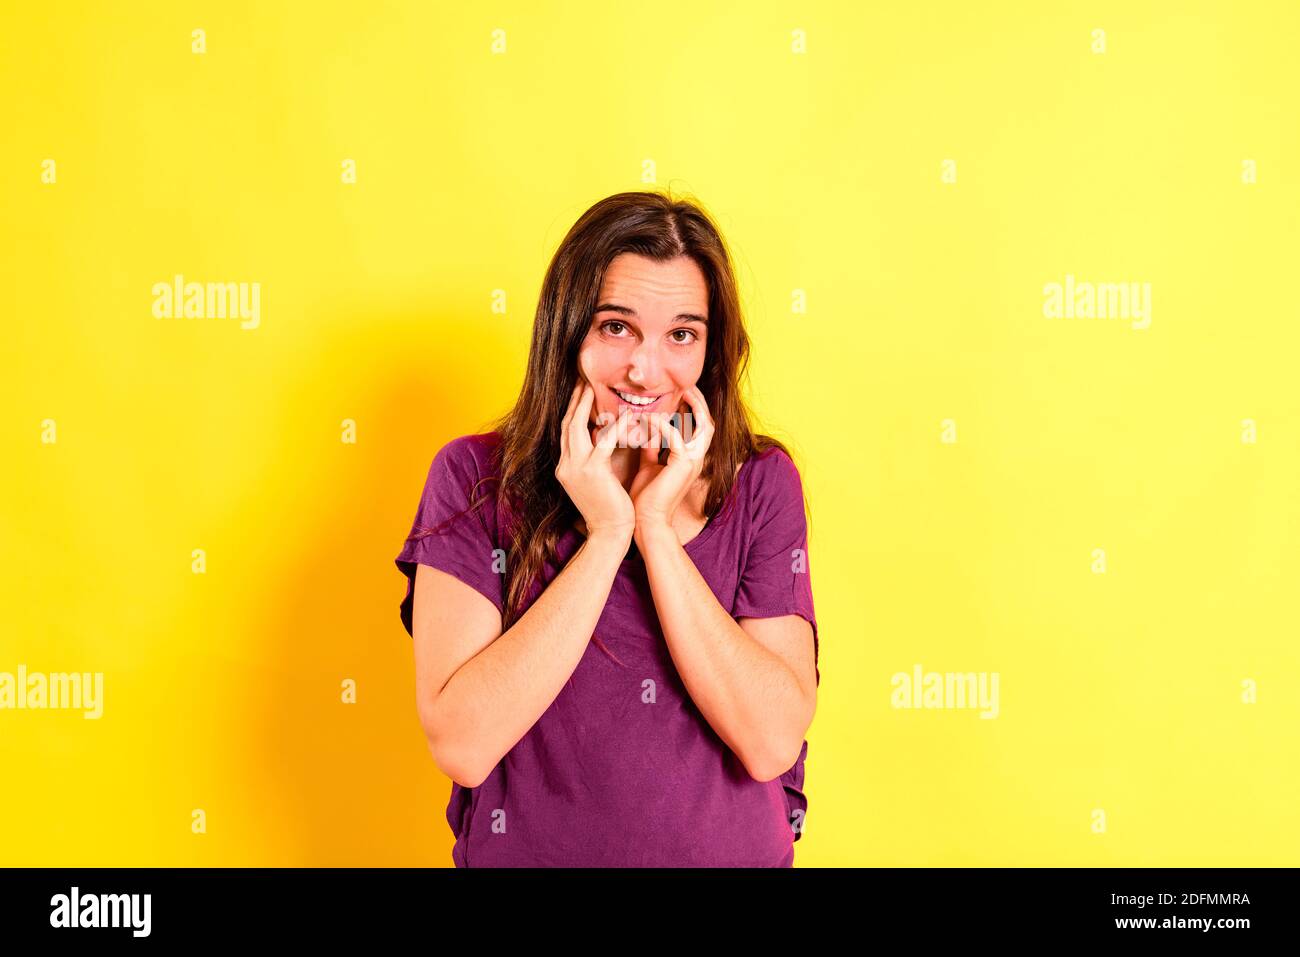 Adorable young woman with thoughtful, pensive gesture dressed casual, isolated on studio background. Stock Photo